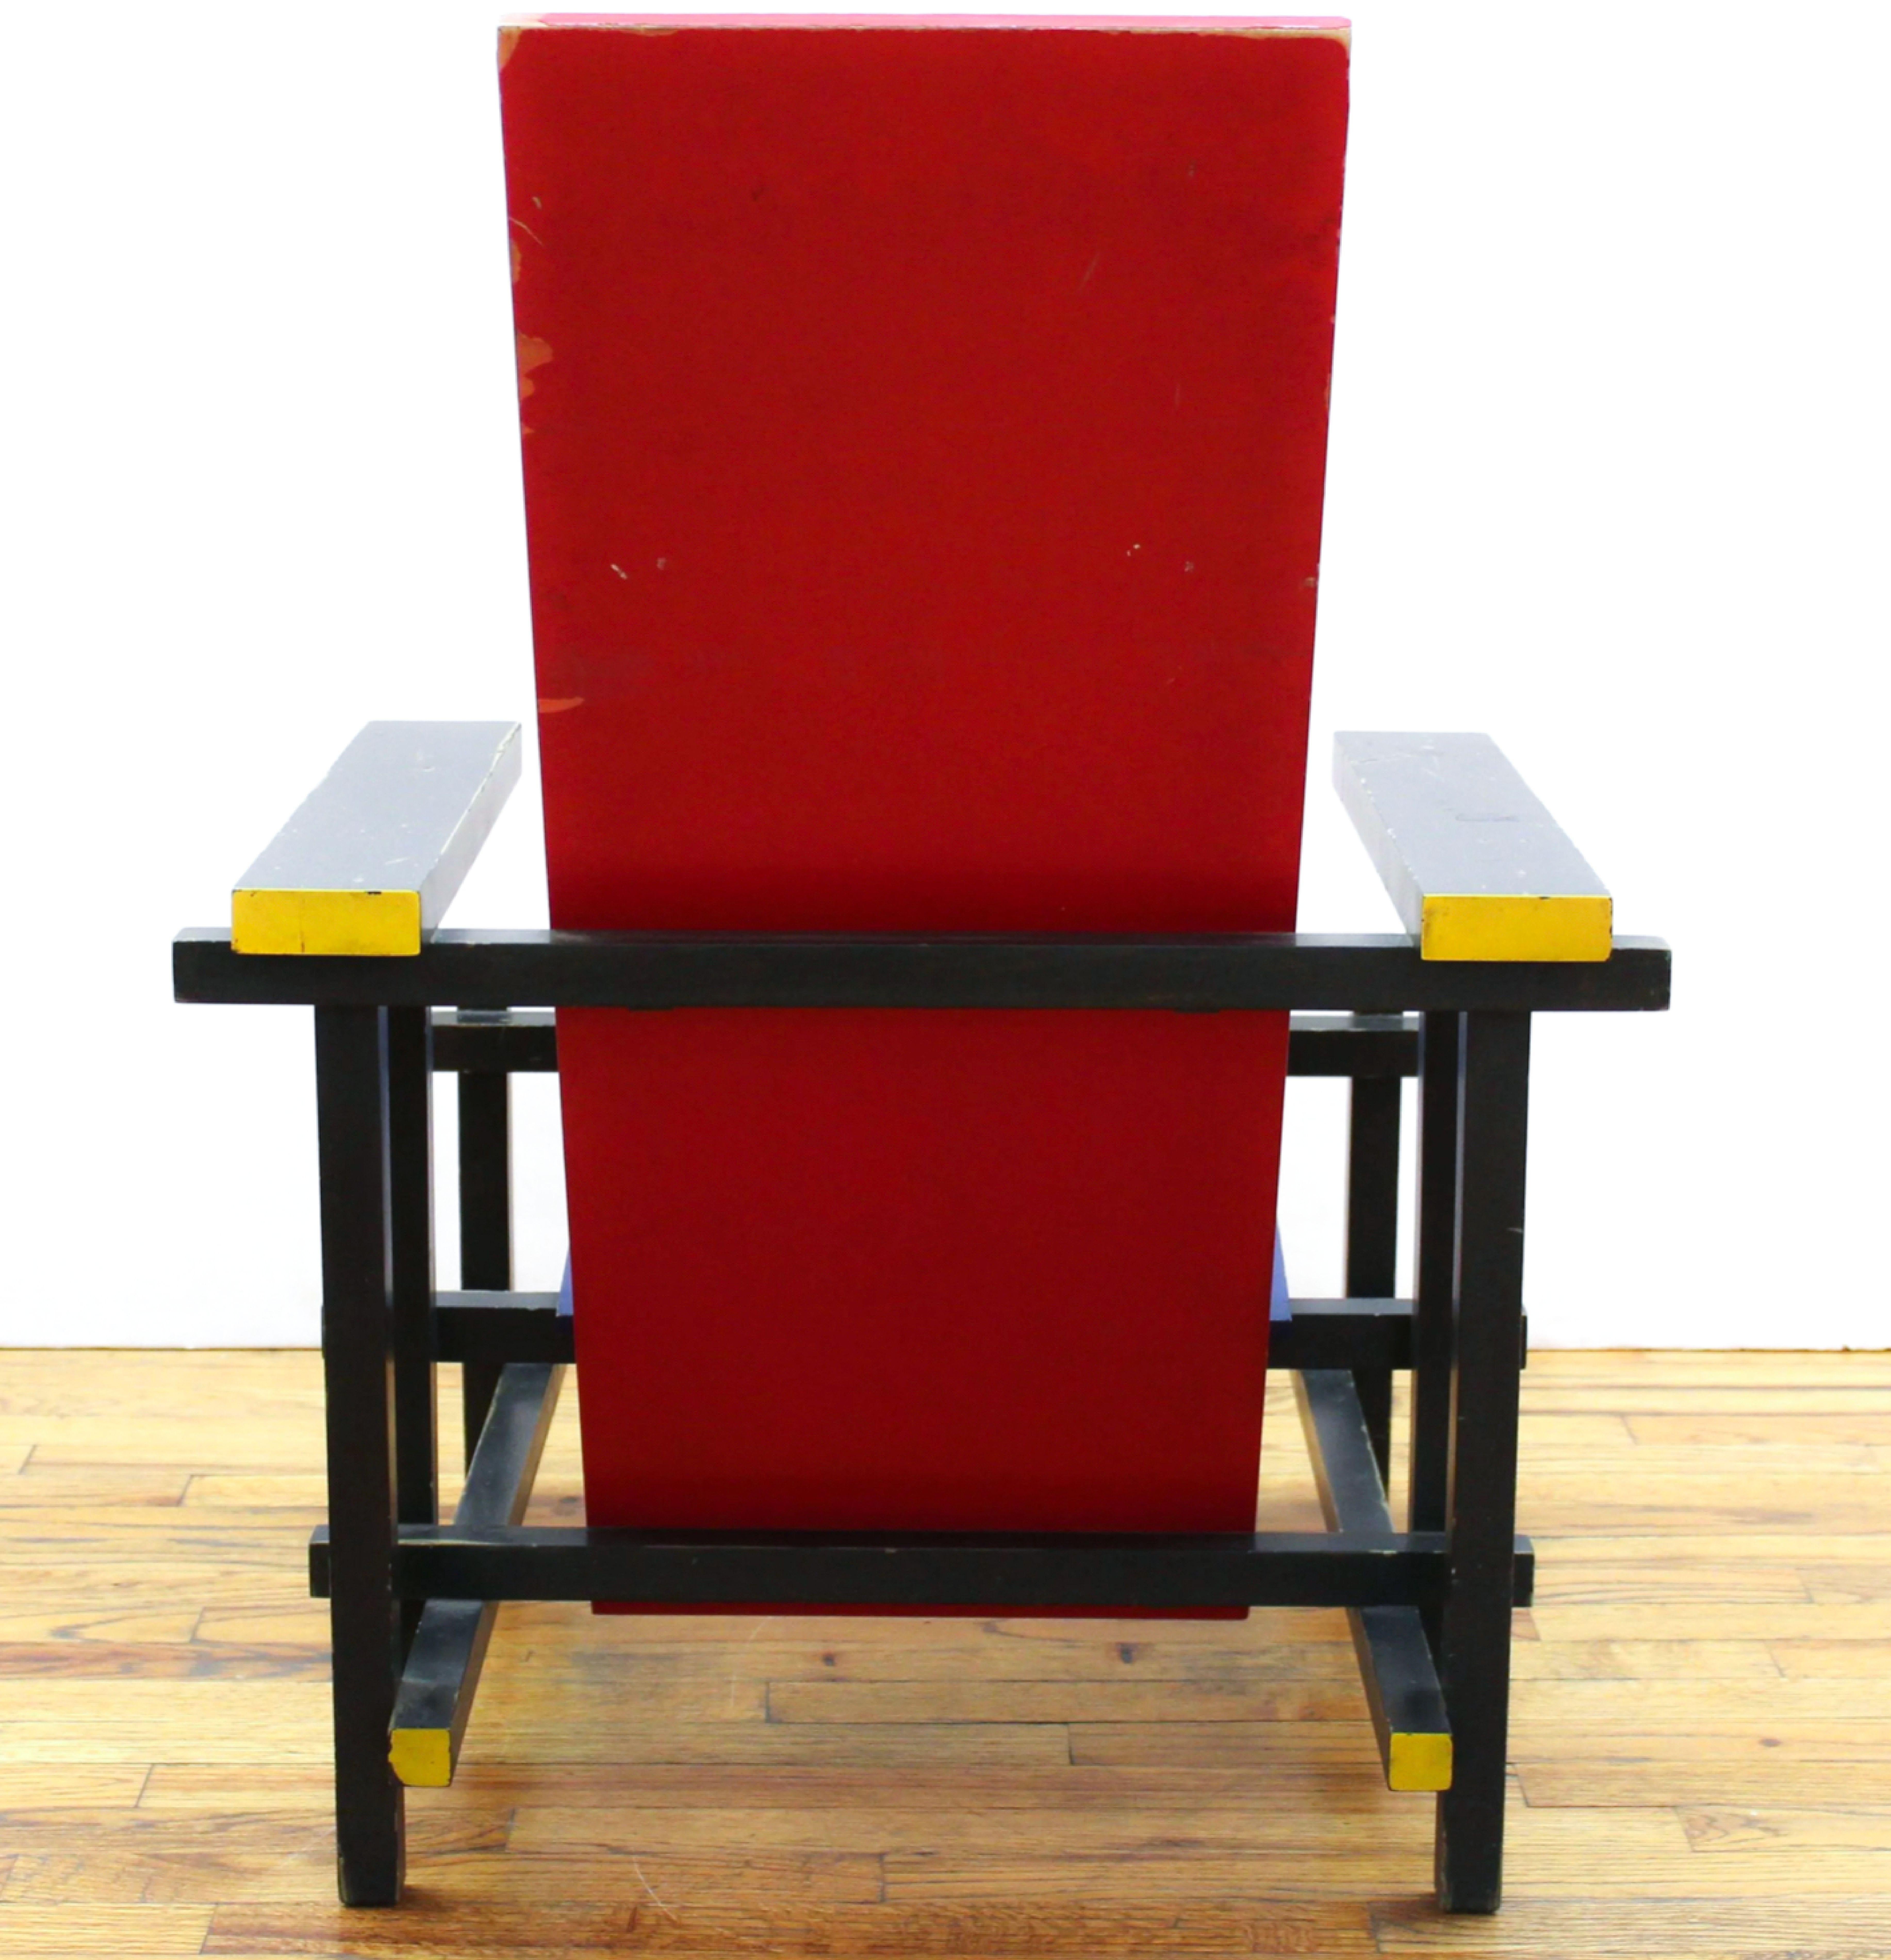 Italian Red Blue Chair by Gerrit Rietveld for Cassina, Italy, De Stijl Modern, 1918 For Sale